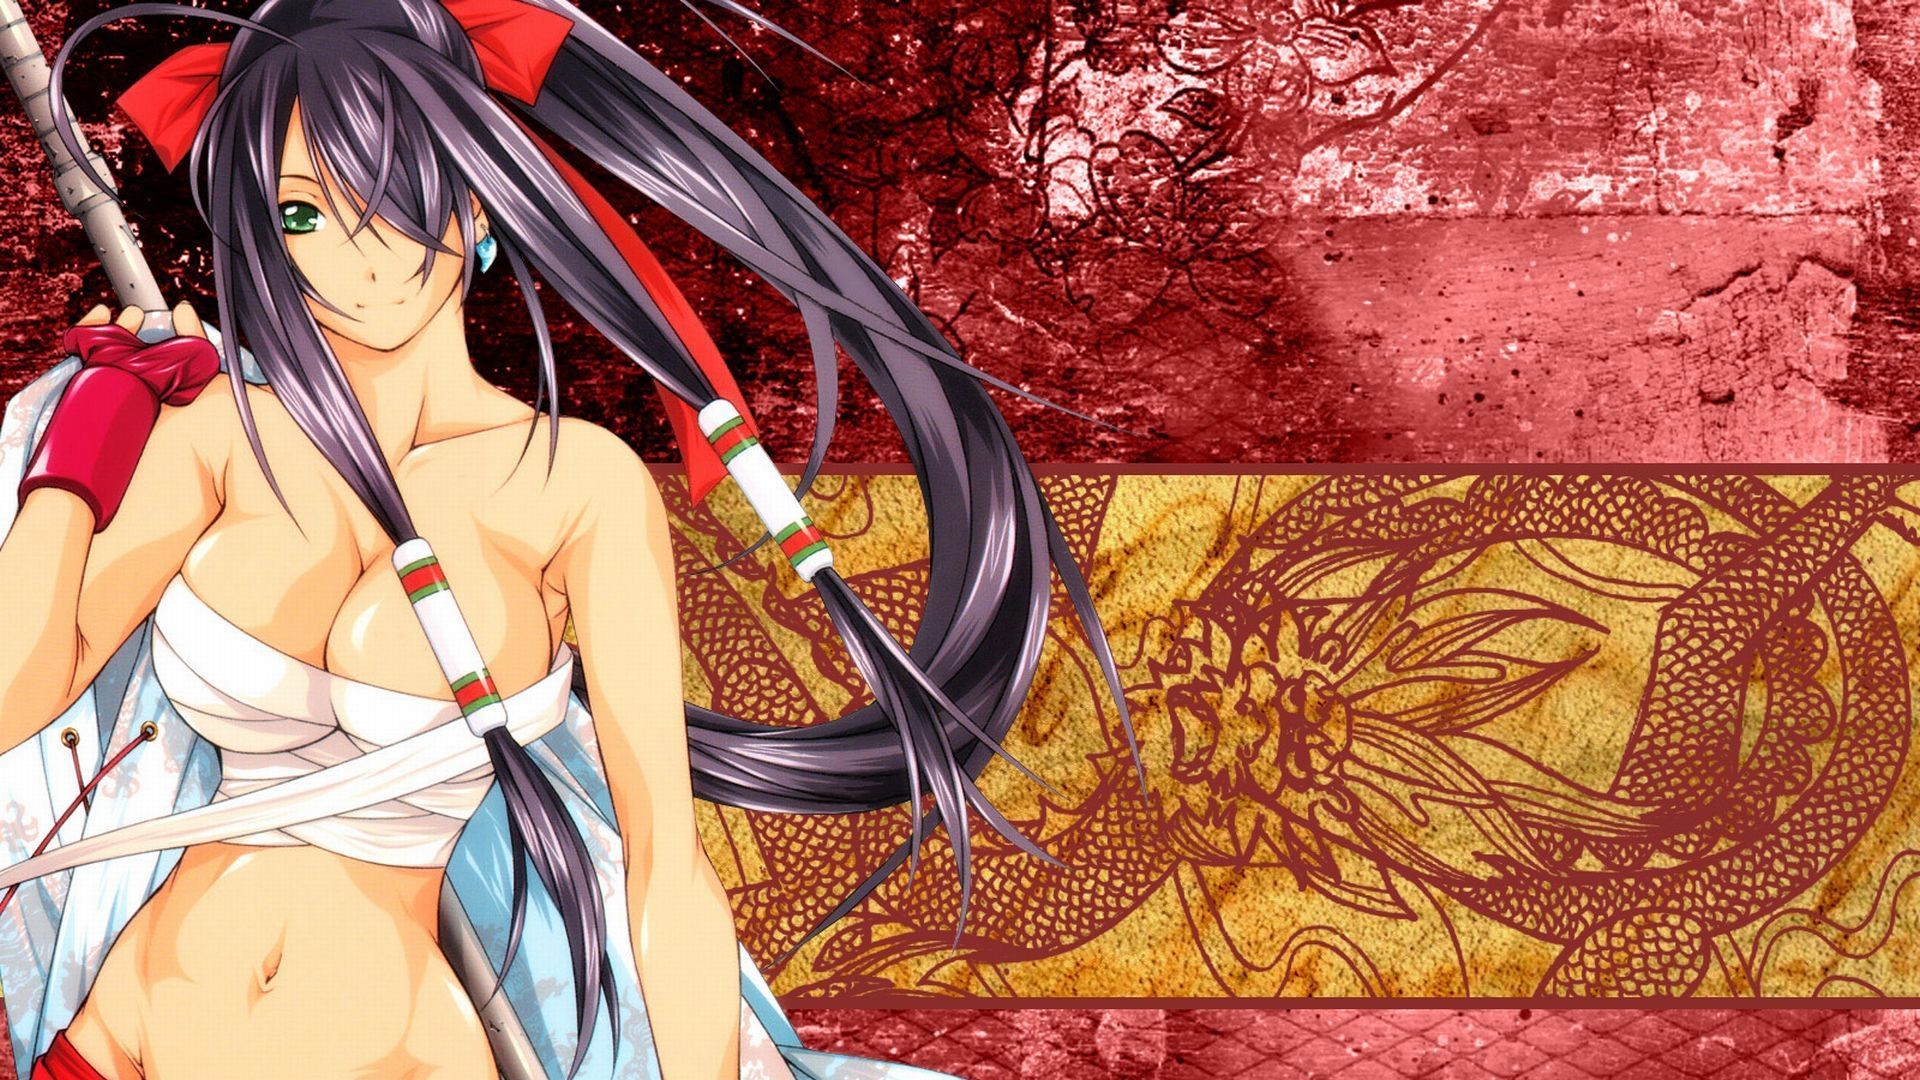 1920x1080 ... hot anime 1080p hd wallpaper download cool hd wallpapers here ...